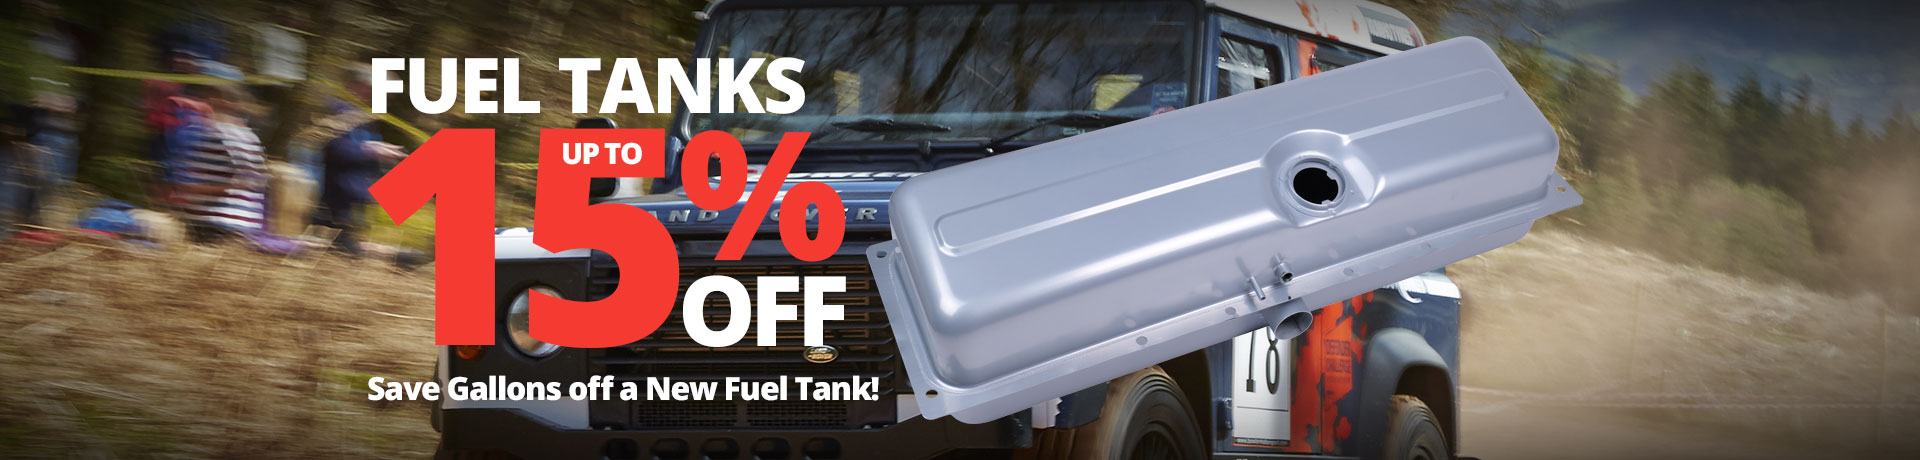 Save up to 15% On Fuel Tanks